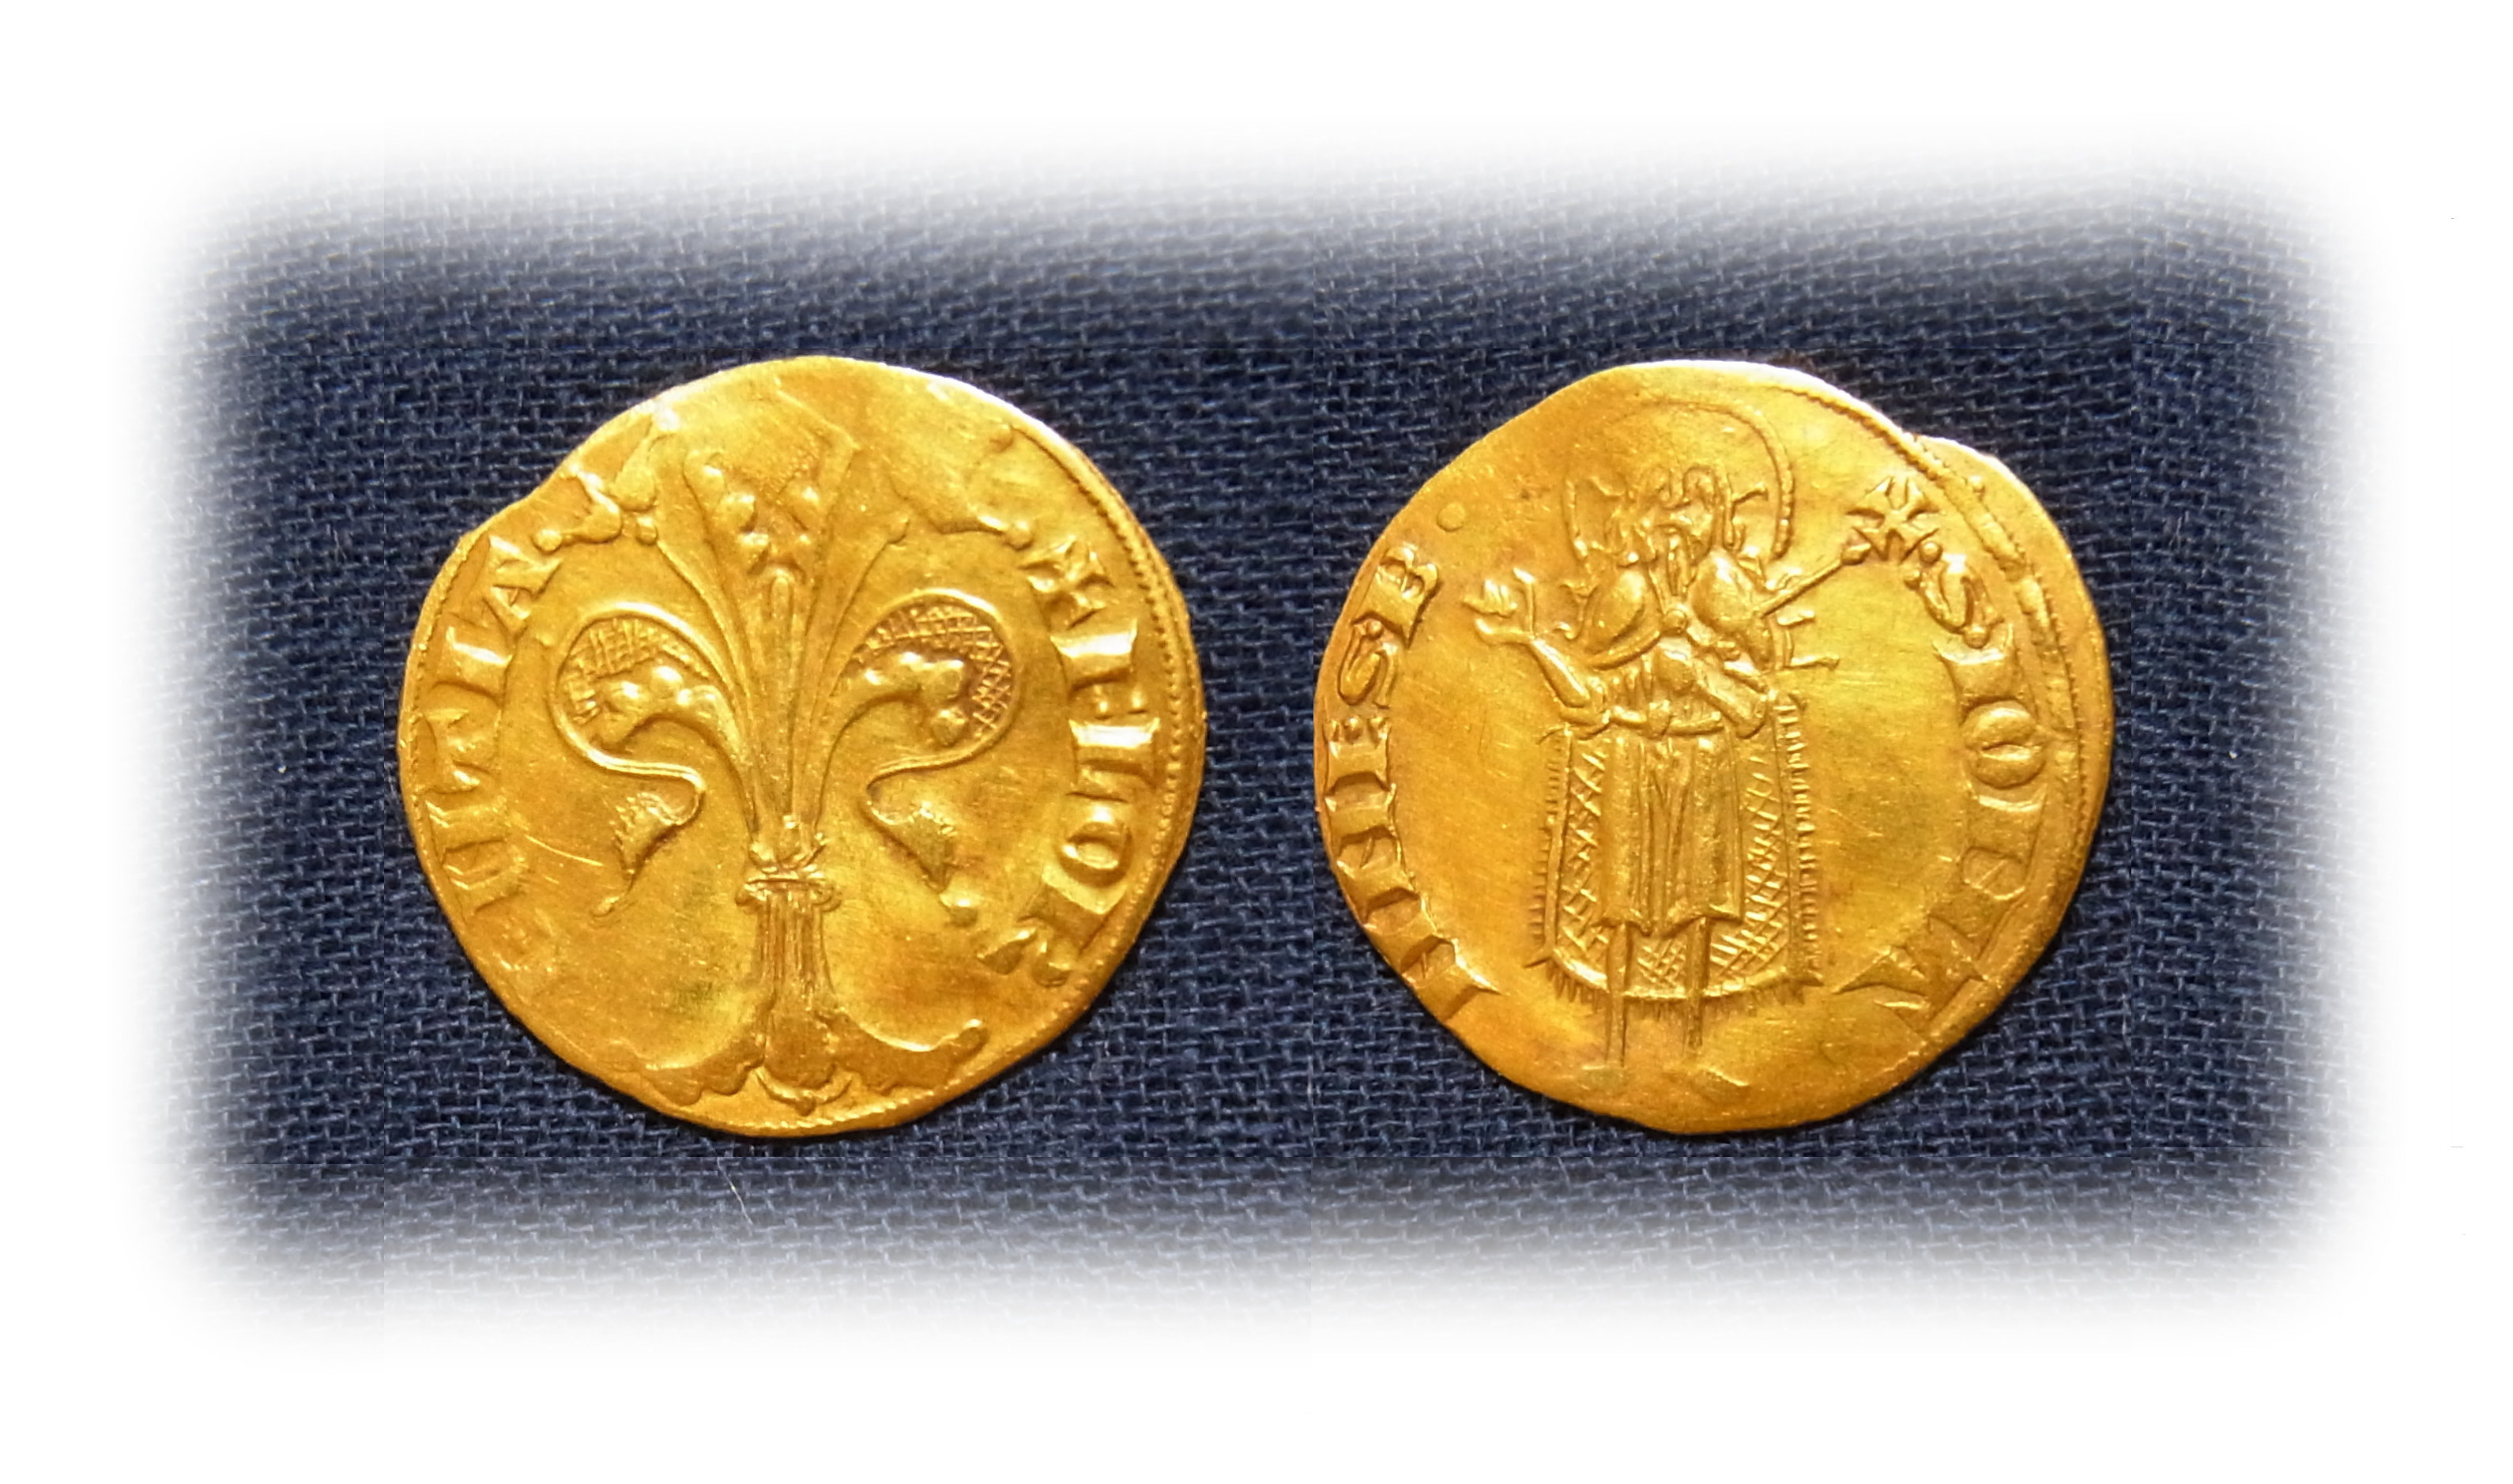 Gold coin of Republic of Florence, Fiorino d'oro, The Florentine florin